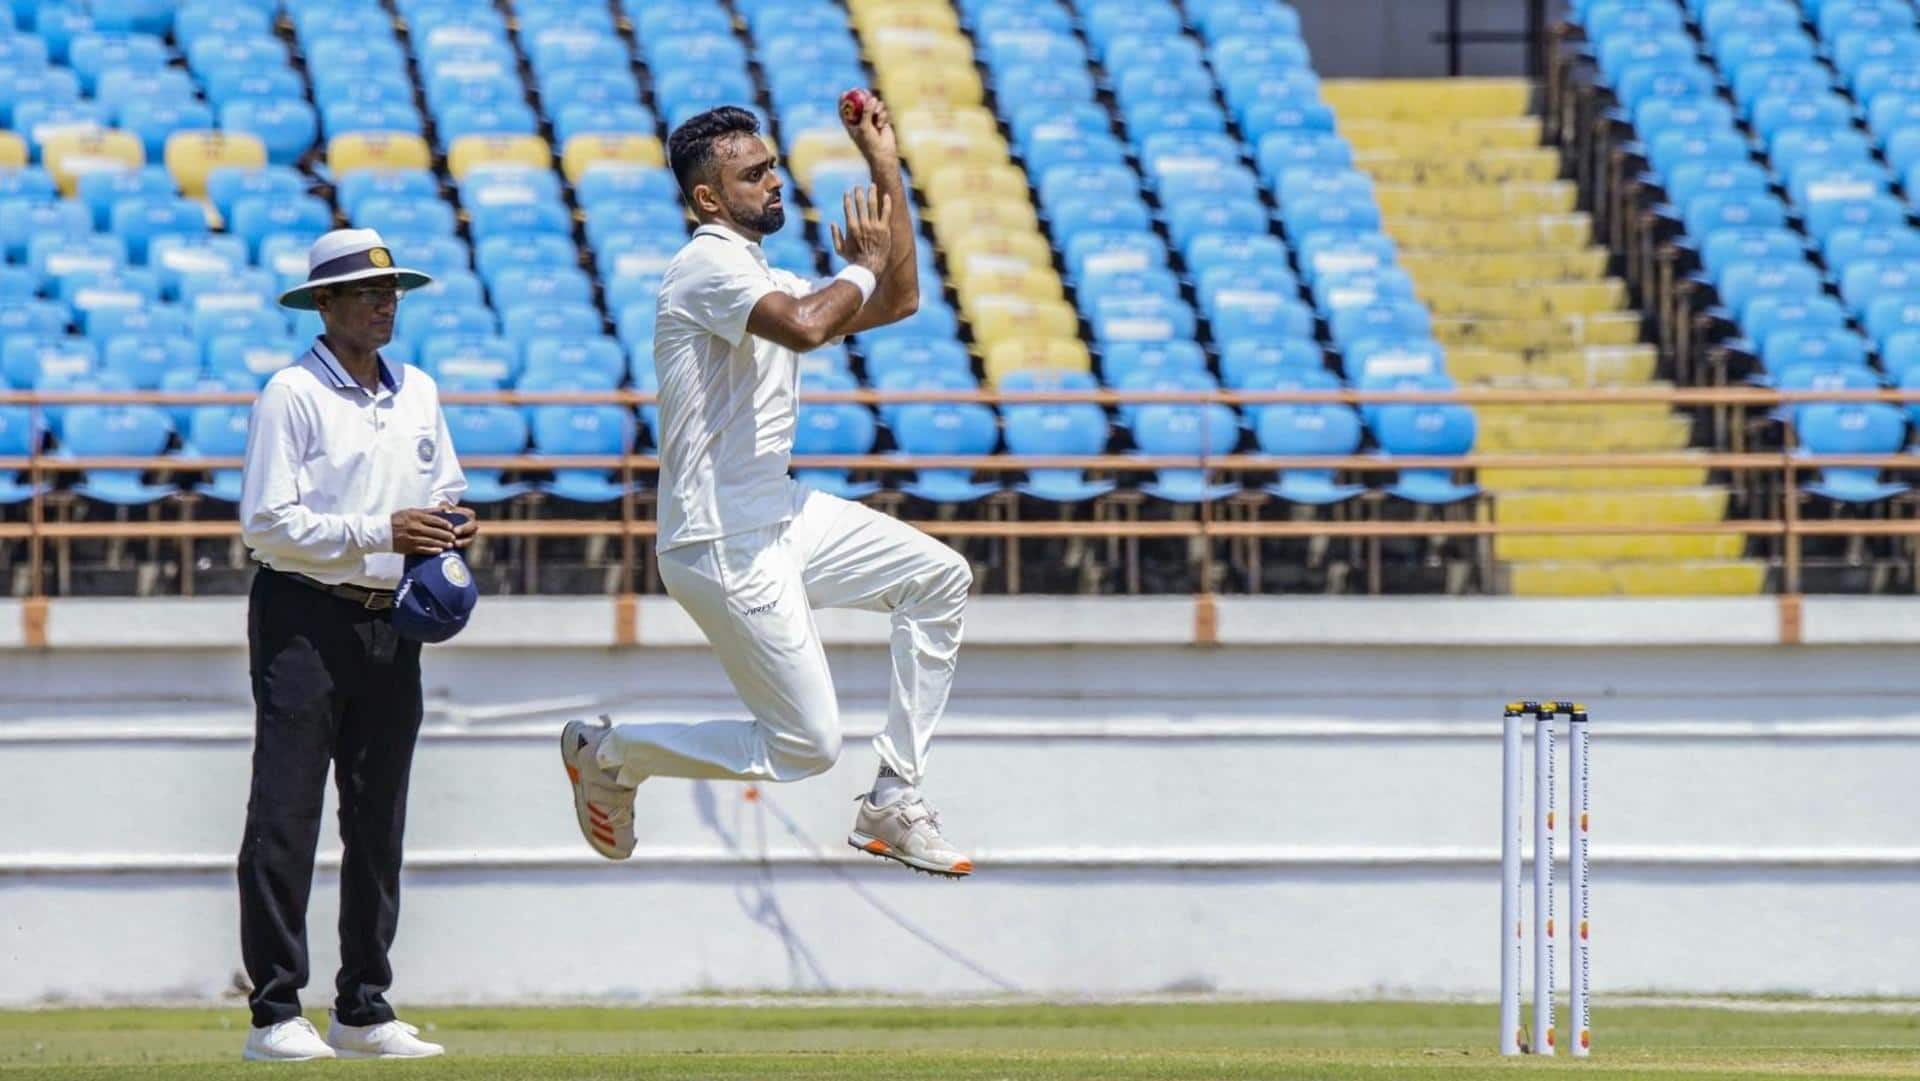 County Championship: Indian pacer Jaydev Unadkat joins Sussex